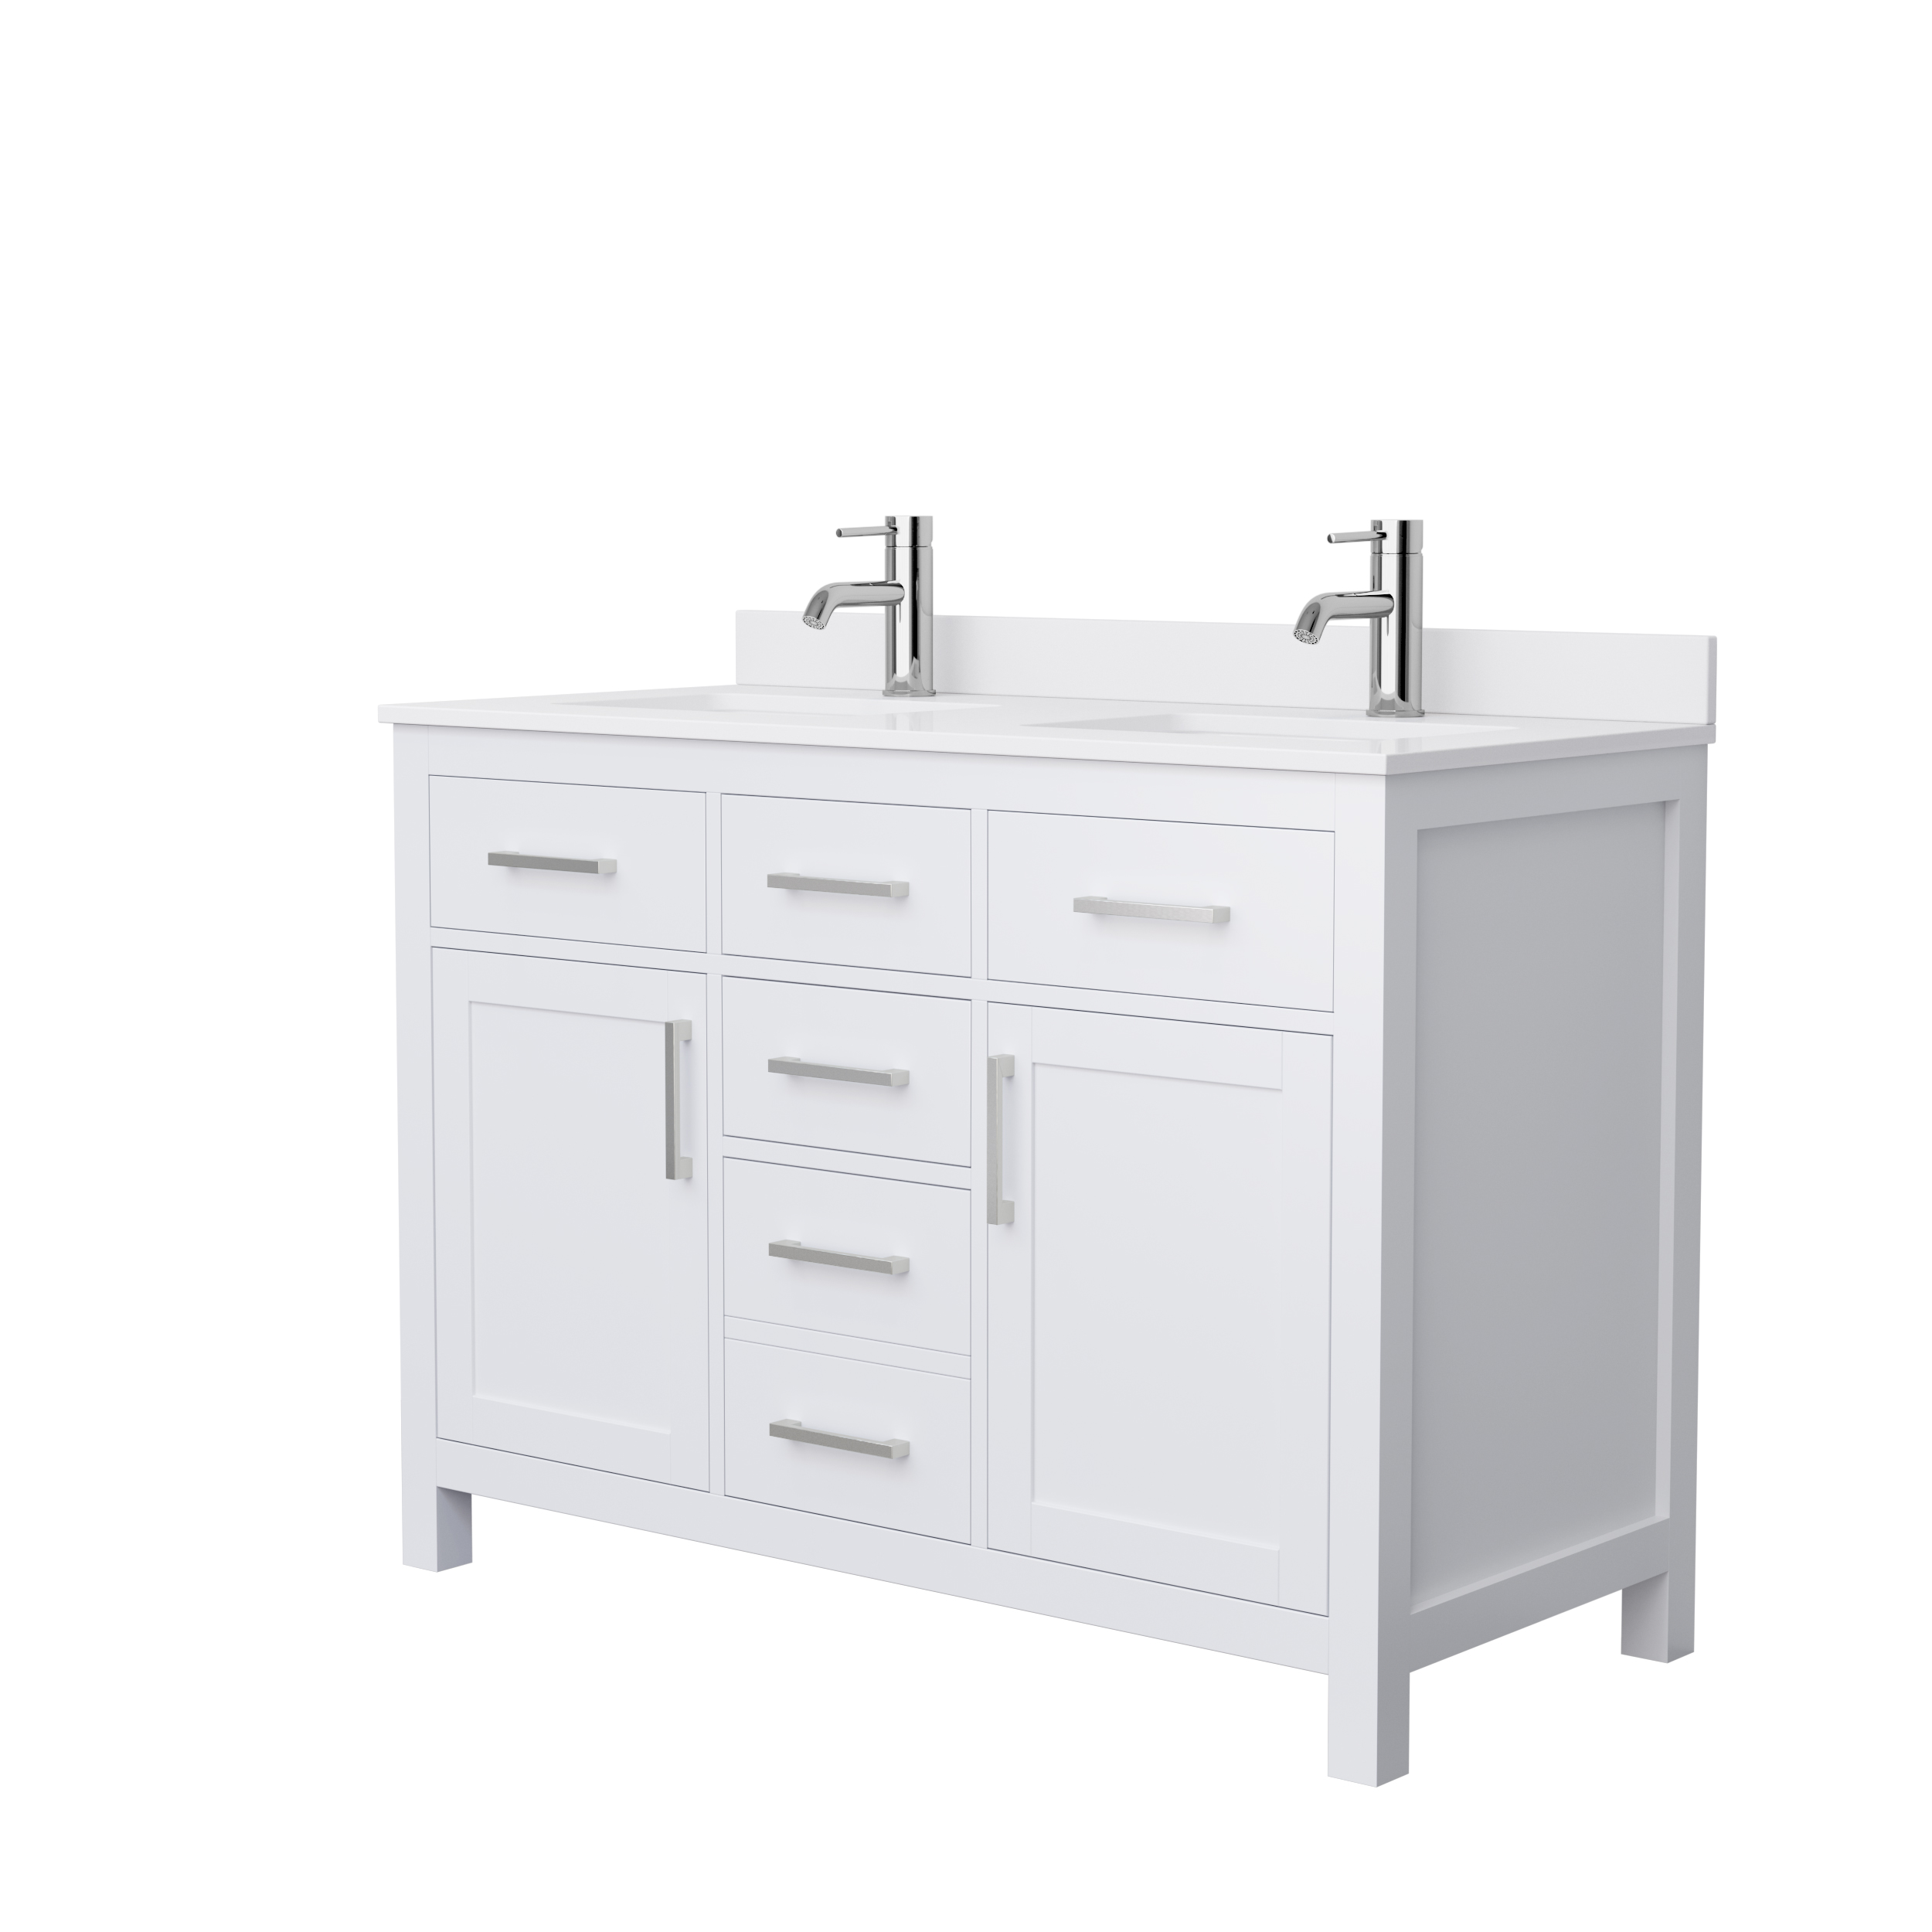 beckett 48" double bathroom vanity by wyndham collection - white